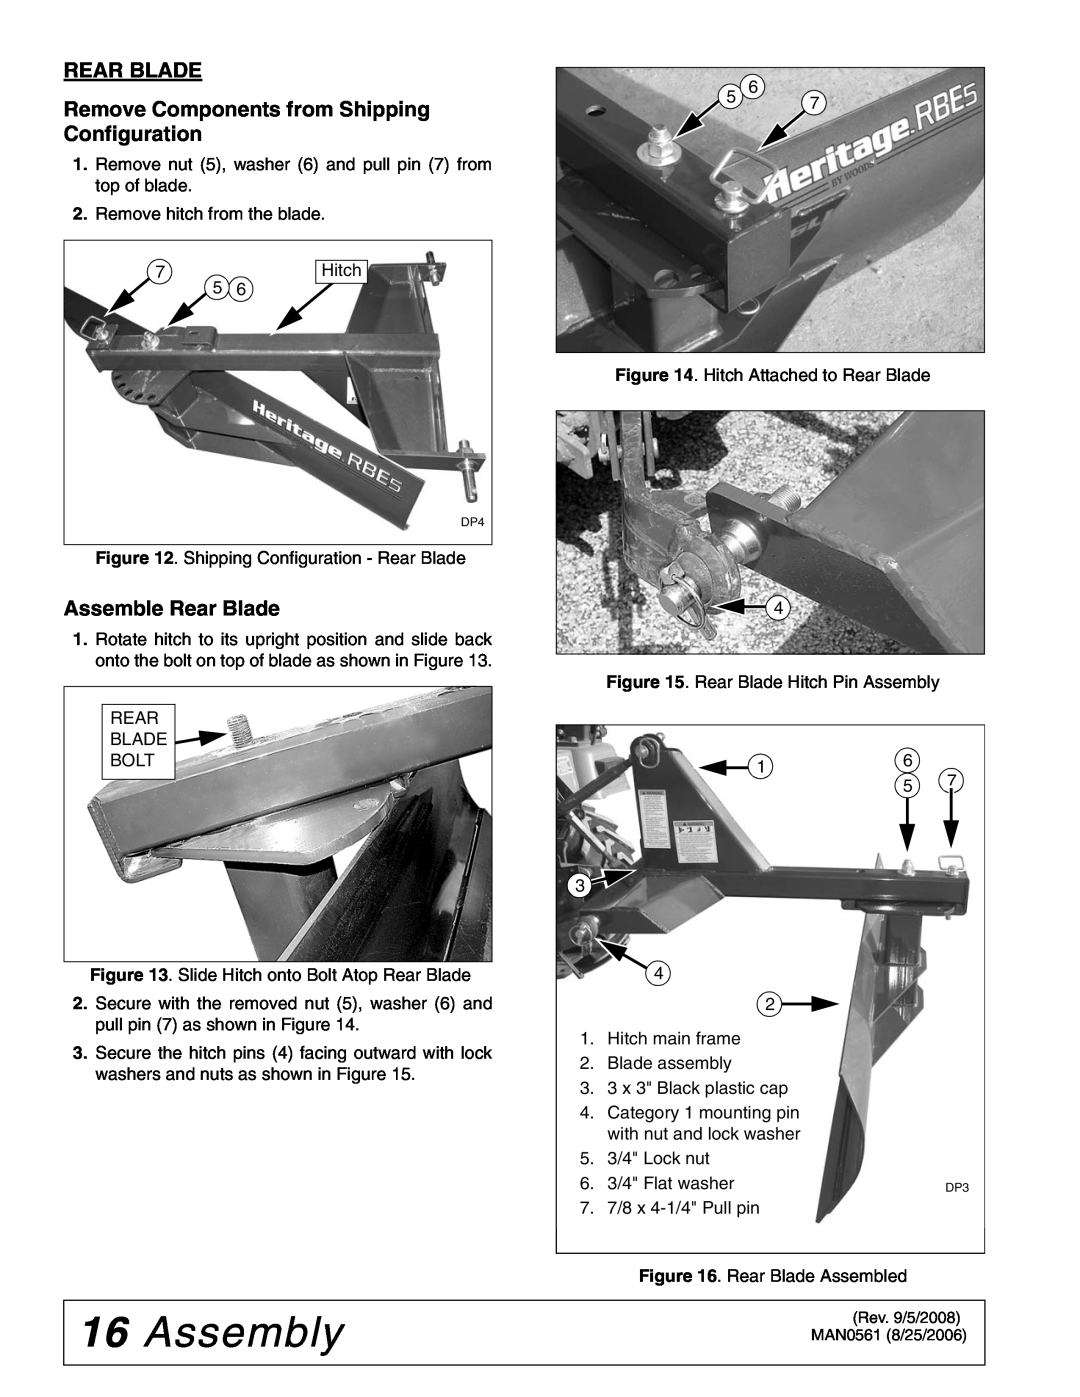 Woods Equipment RBE4, RBE5, BSE5 manual 16Assembly, Assemble Rear Blade, Remove Components from Shipping Configuration 